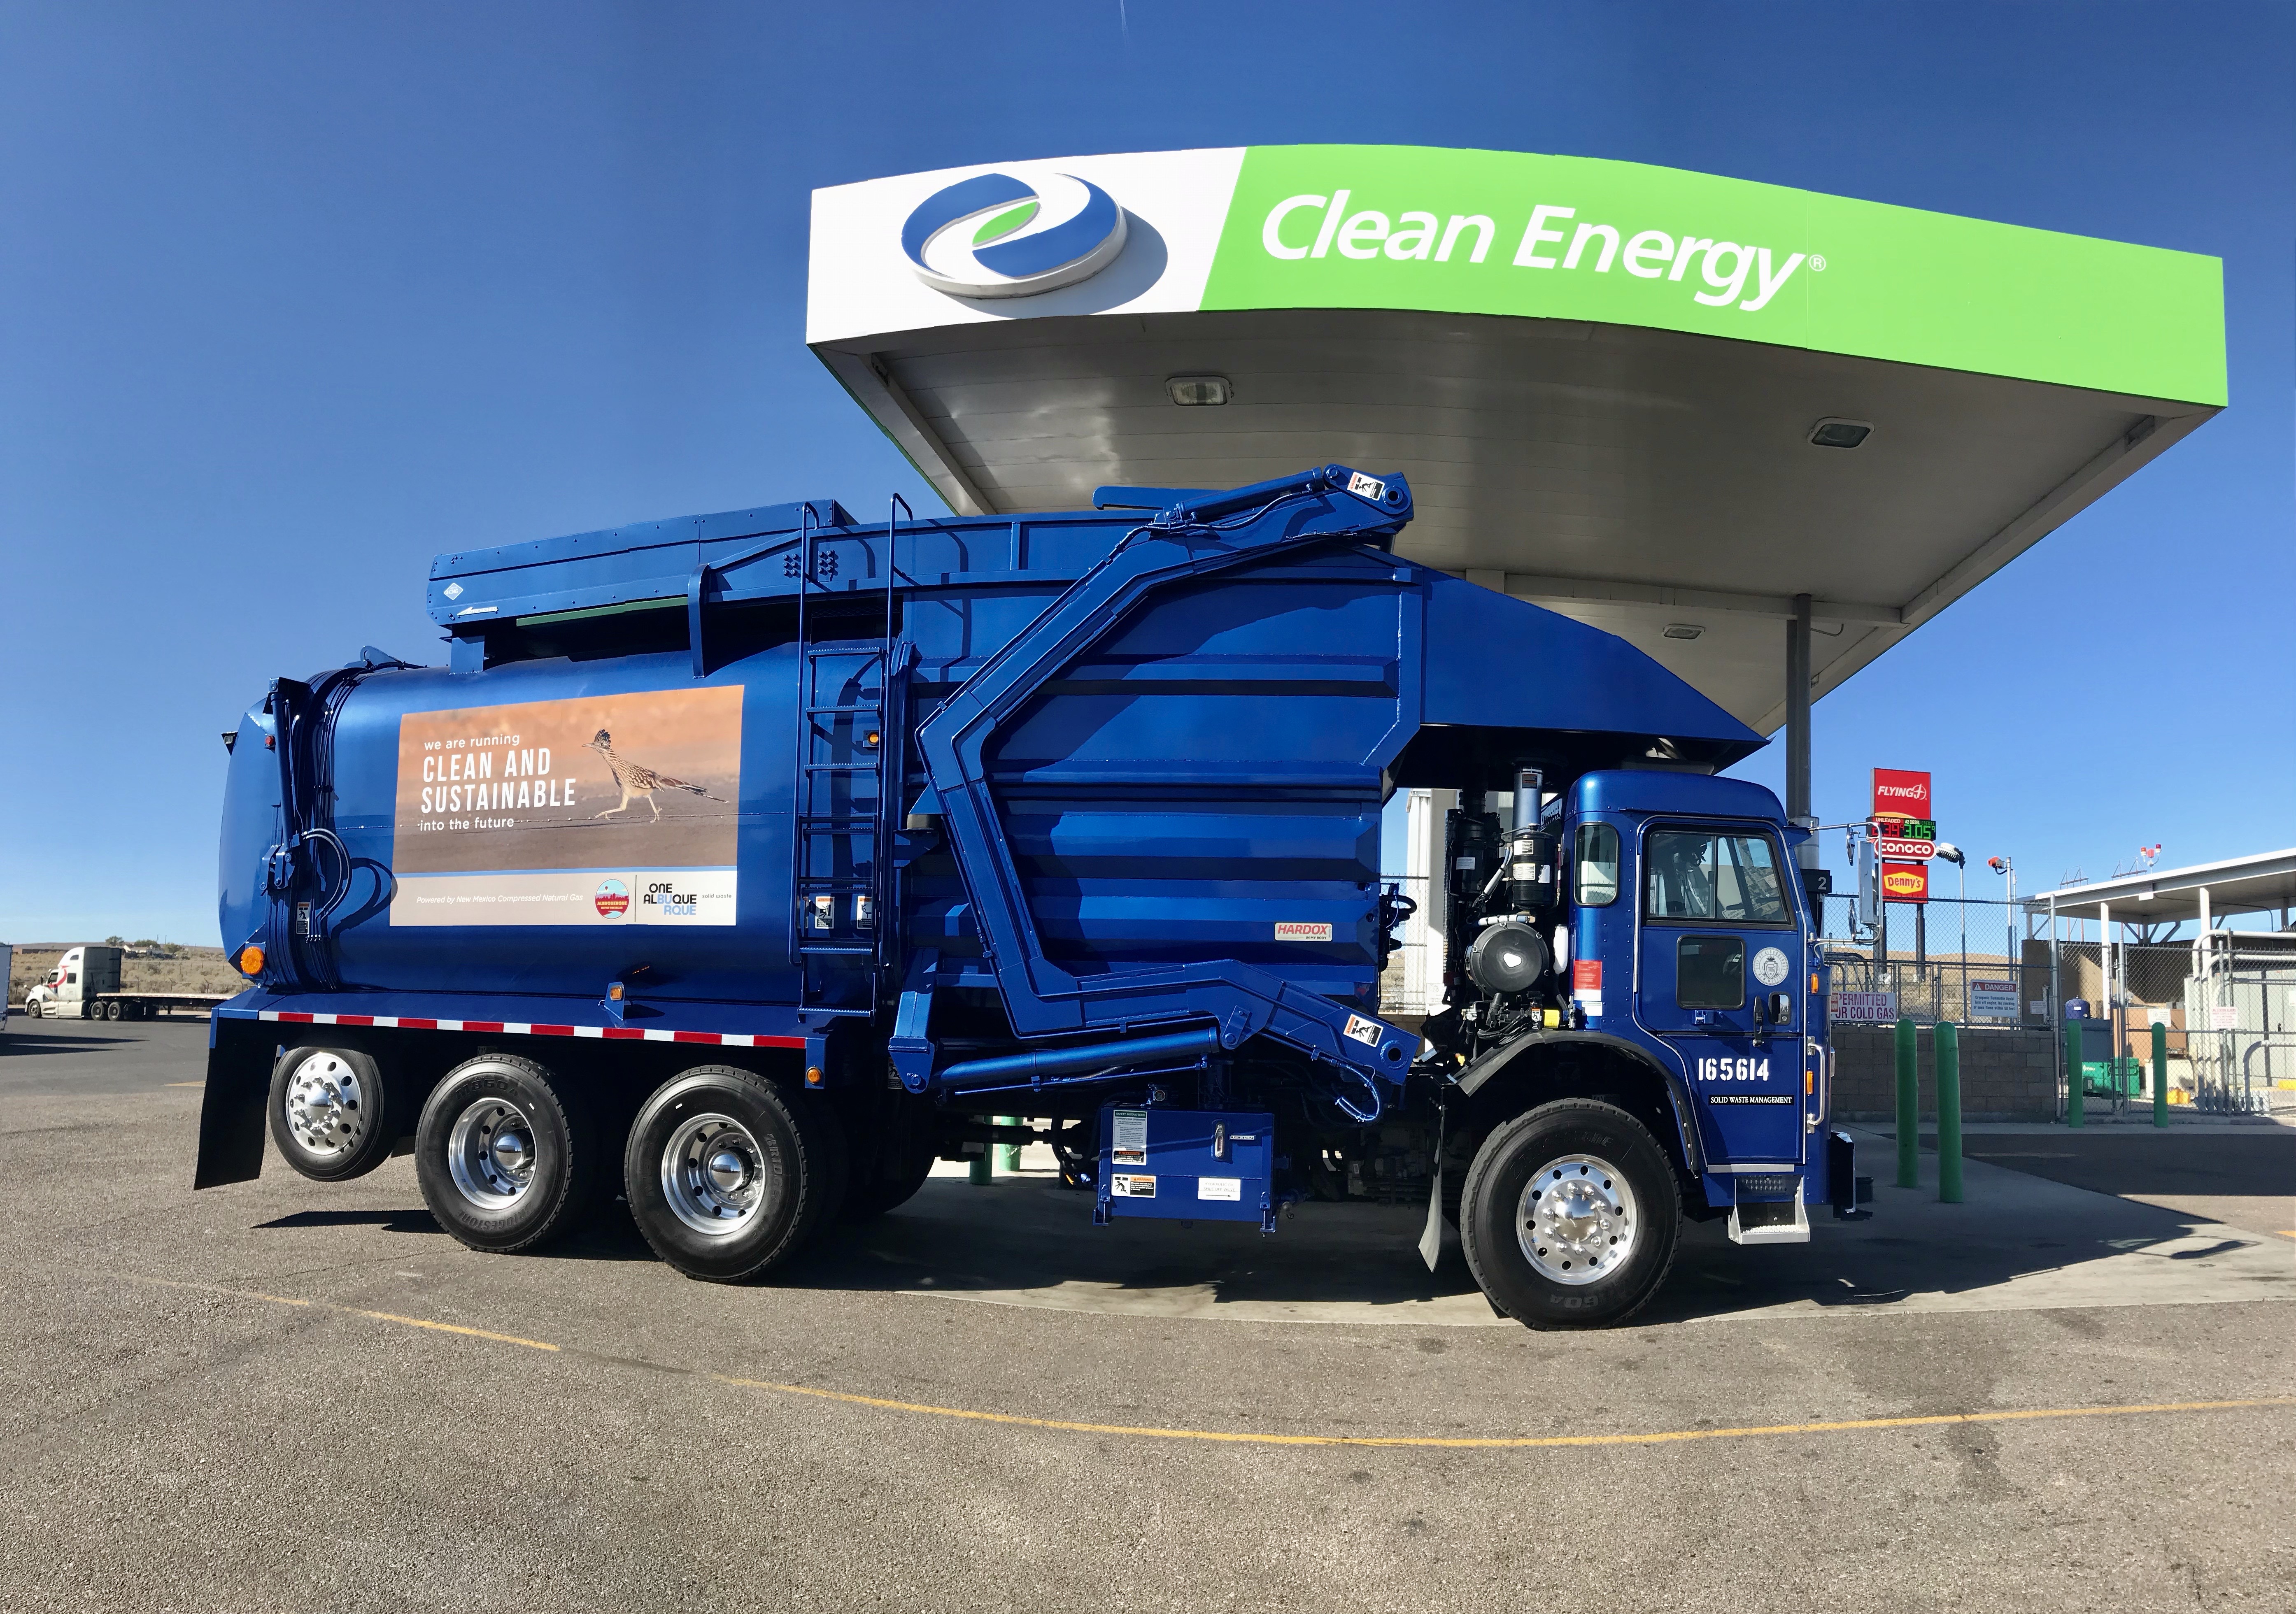 City Of Albuquerque Announces Arrival Of New Trash Collection Vehicles Powered By Alternative Fuel City Of Albuquerque